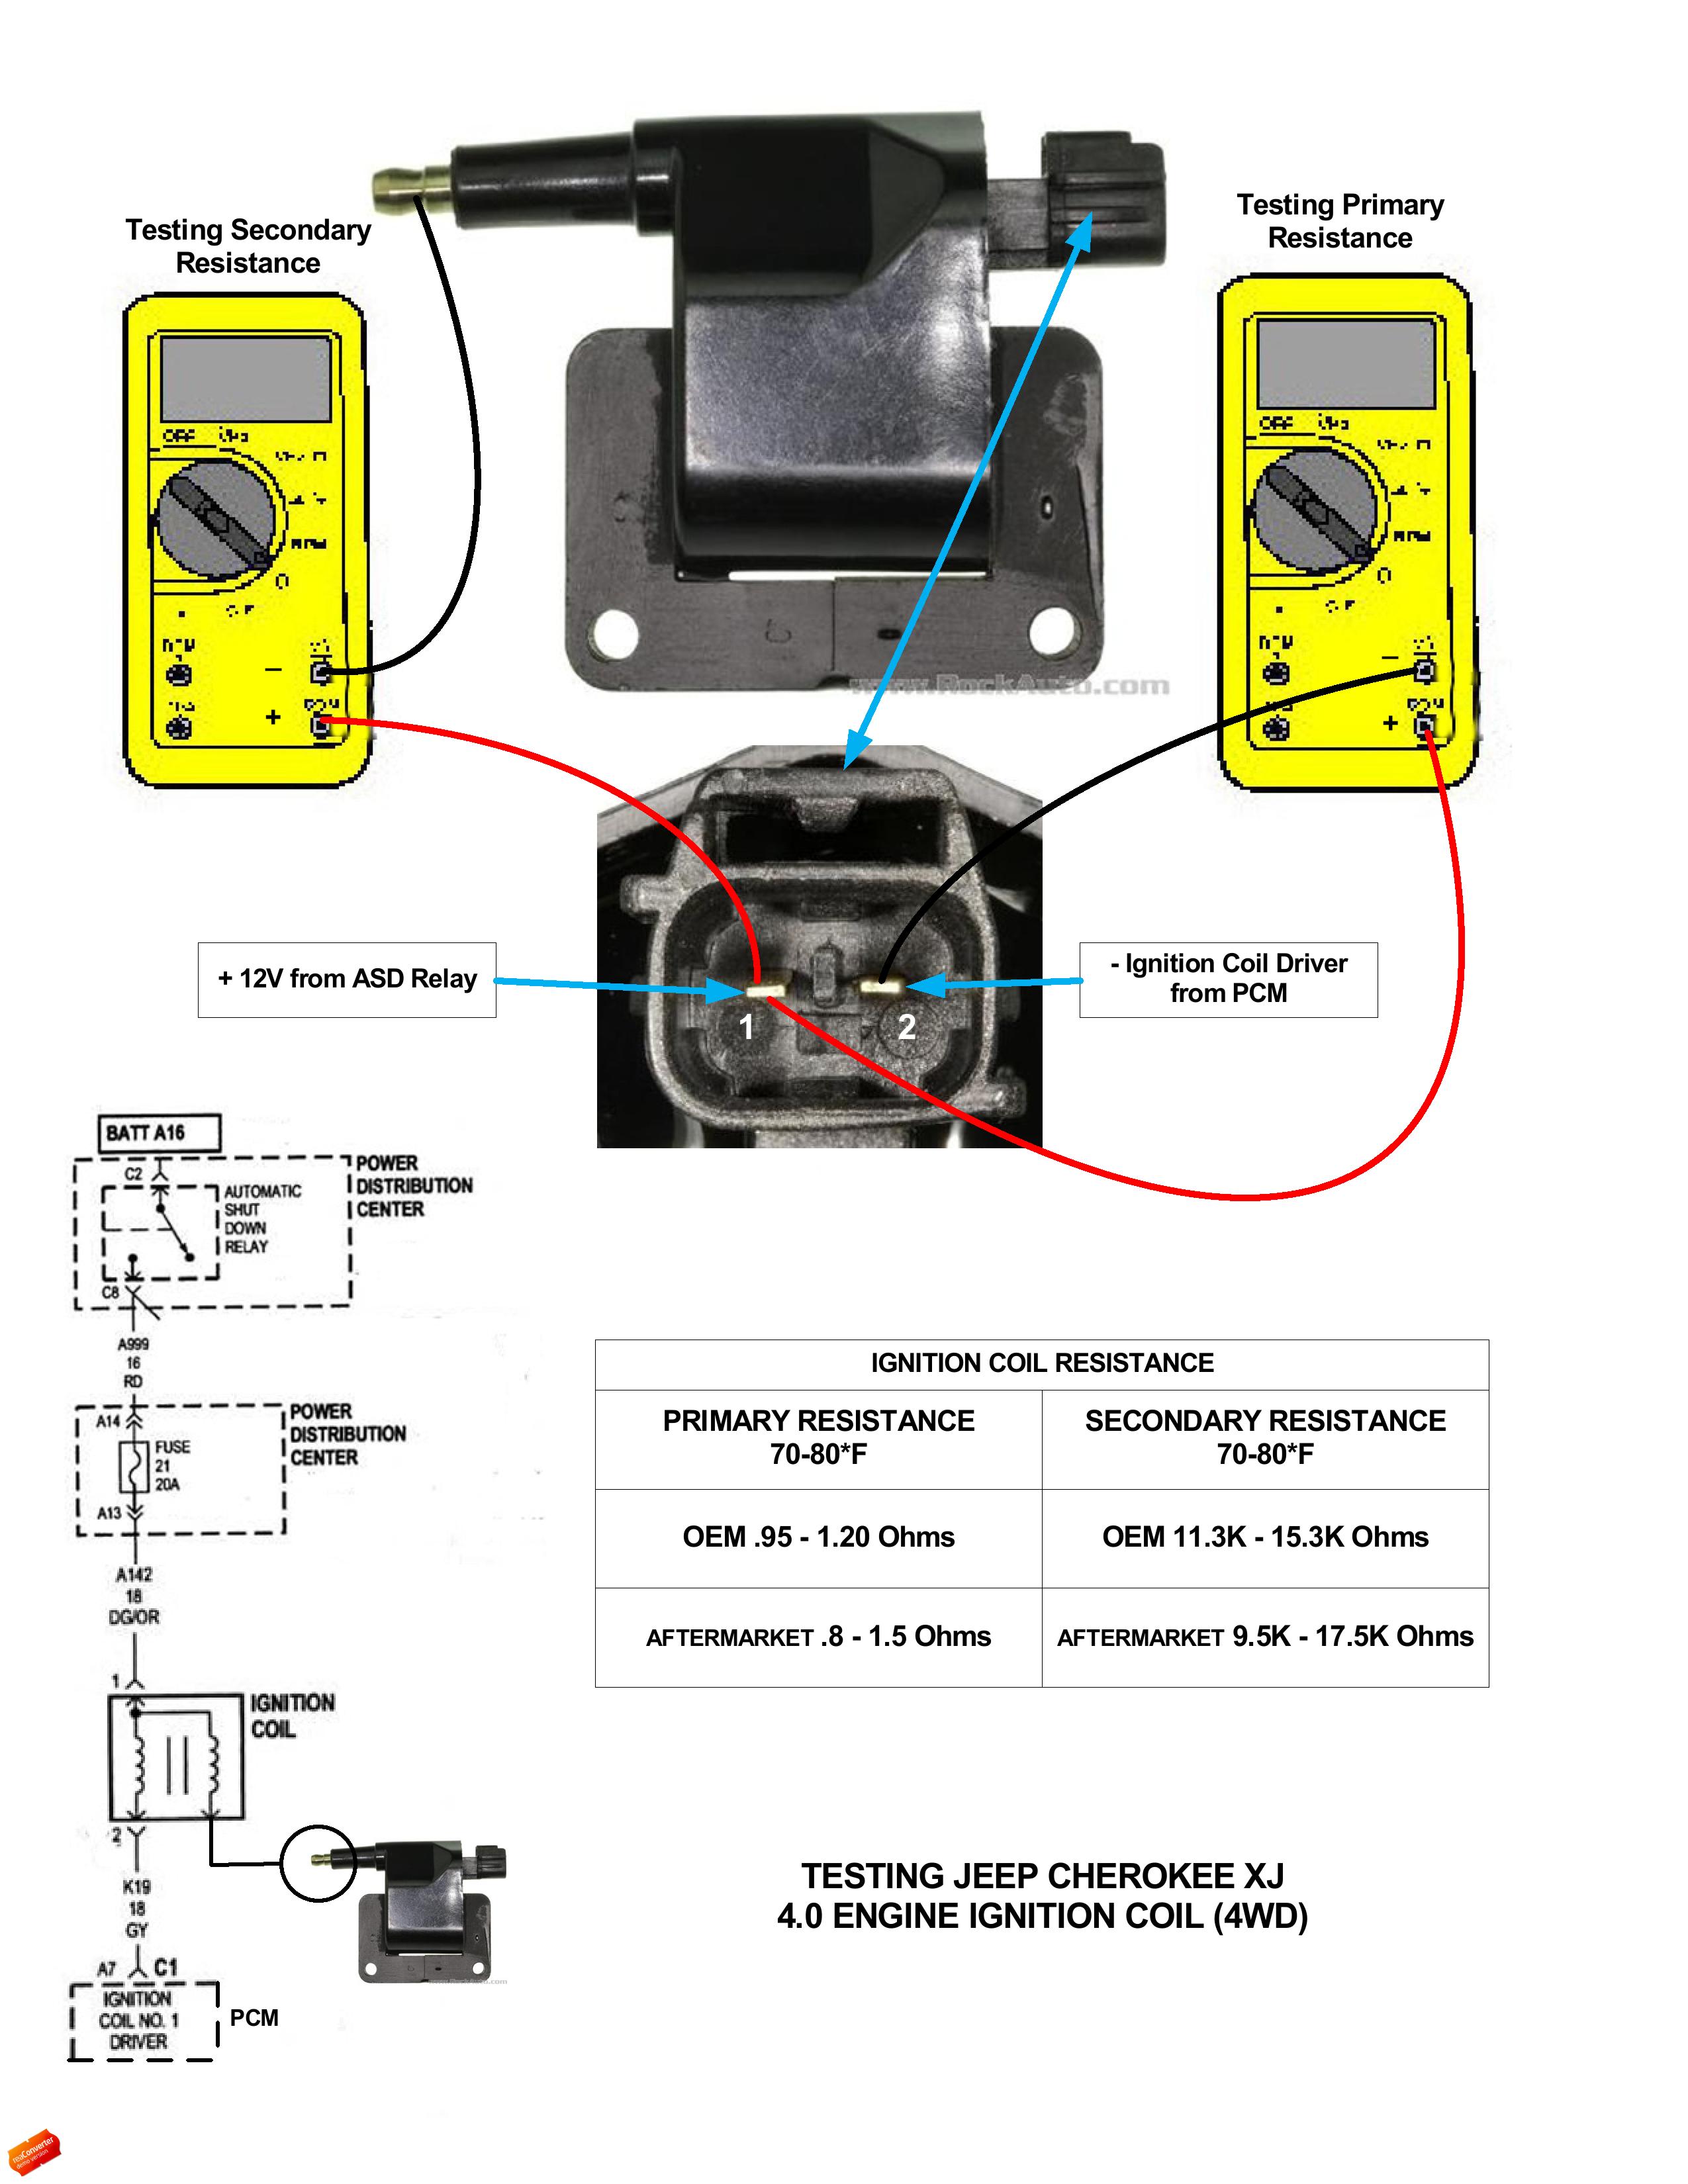 having trouble 1995 ignition 4.0 wiring - Jeep Cherokee Forum